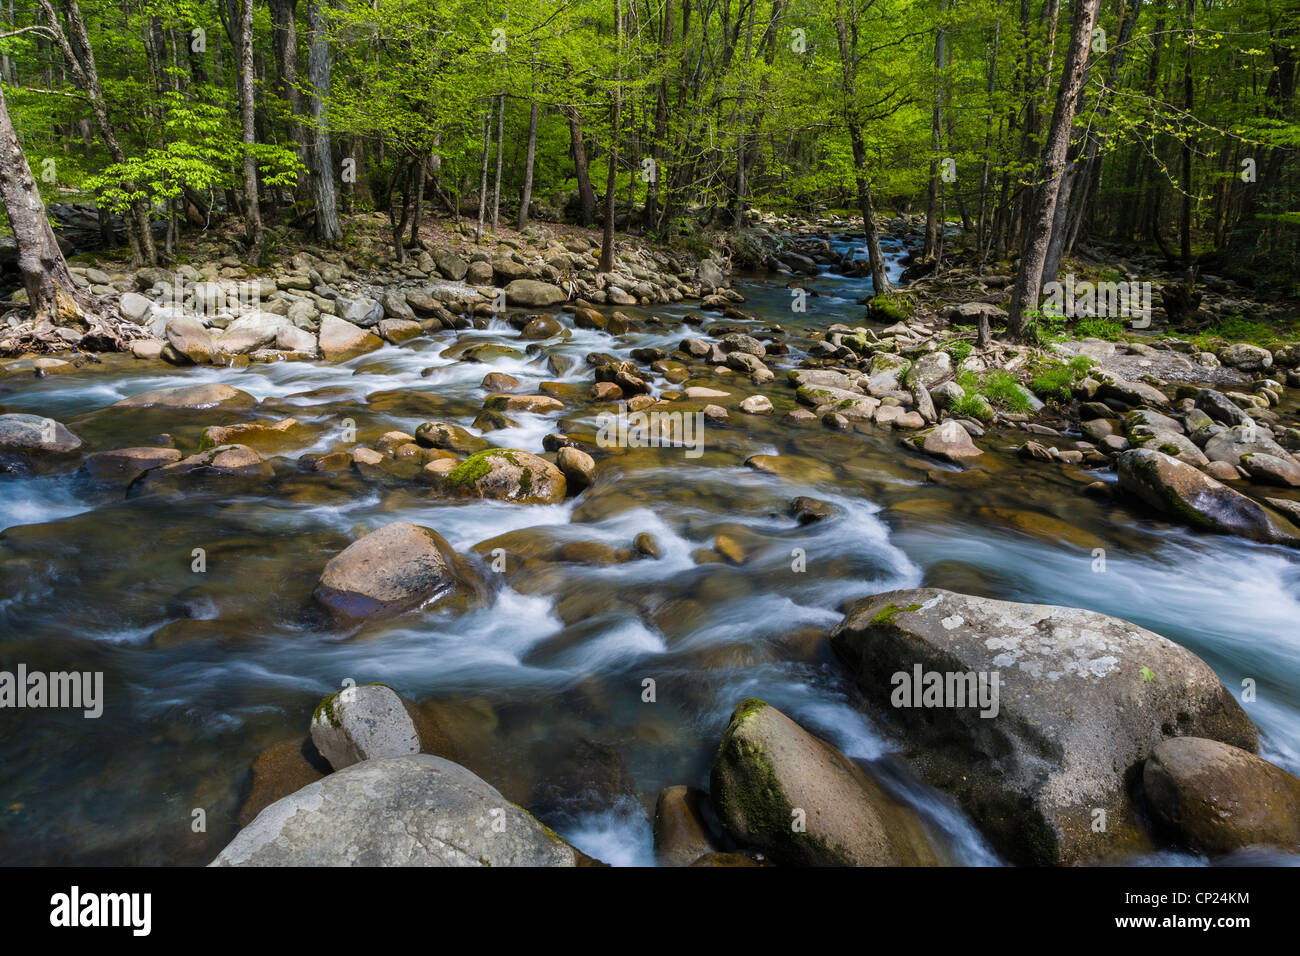 Spring on the Middle Prong of the Little Pigeon River in the Greenbrier area of the Great Smoky Mountains National Park in Tenn Stock Photo